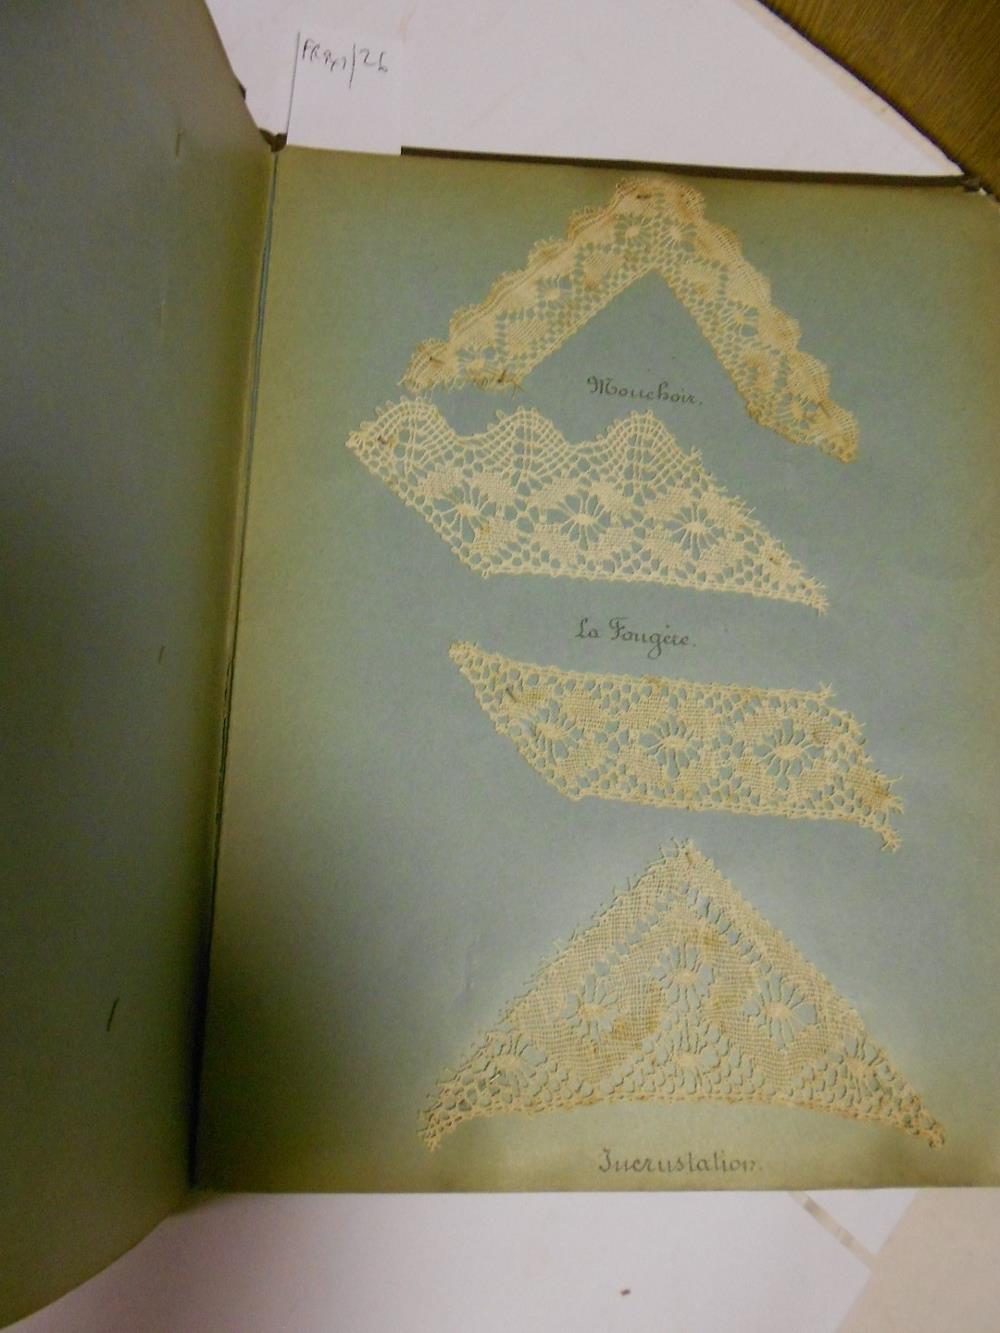 Lace and textiles. Modeles de Dentelles, 4to album c.1890, with 16 loose leaves mounted with lace - Image 3 of 3